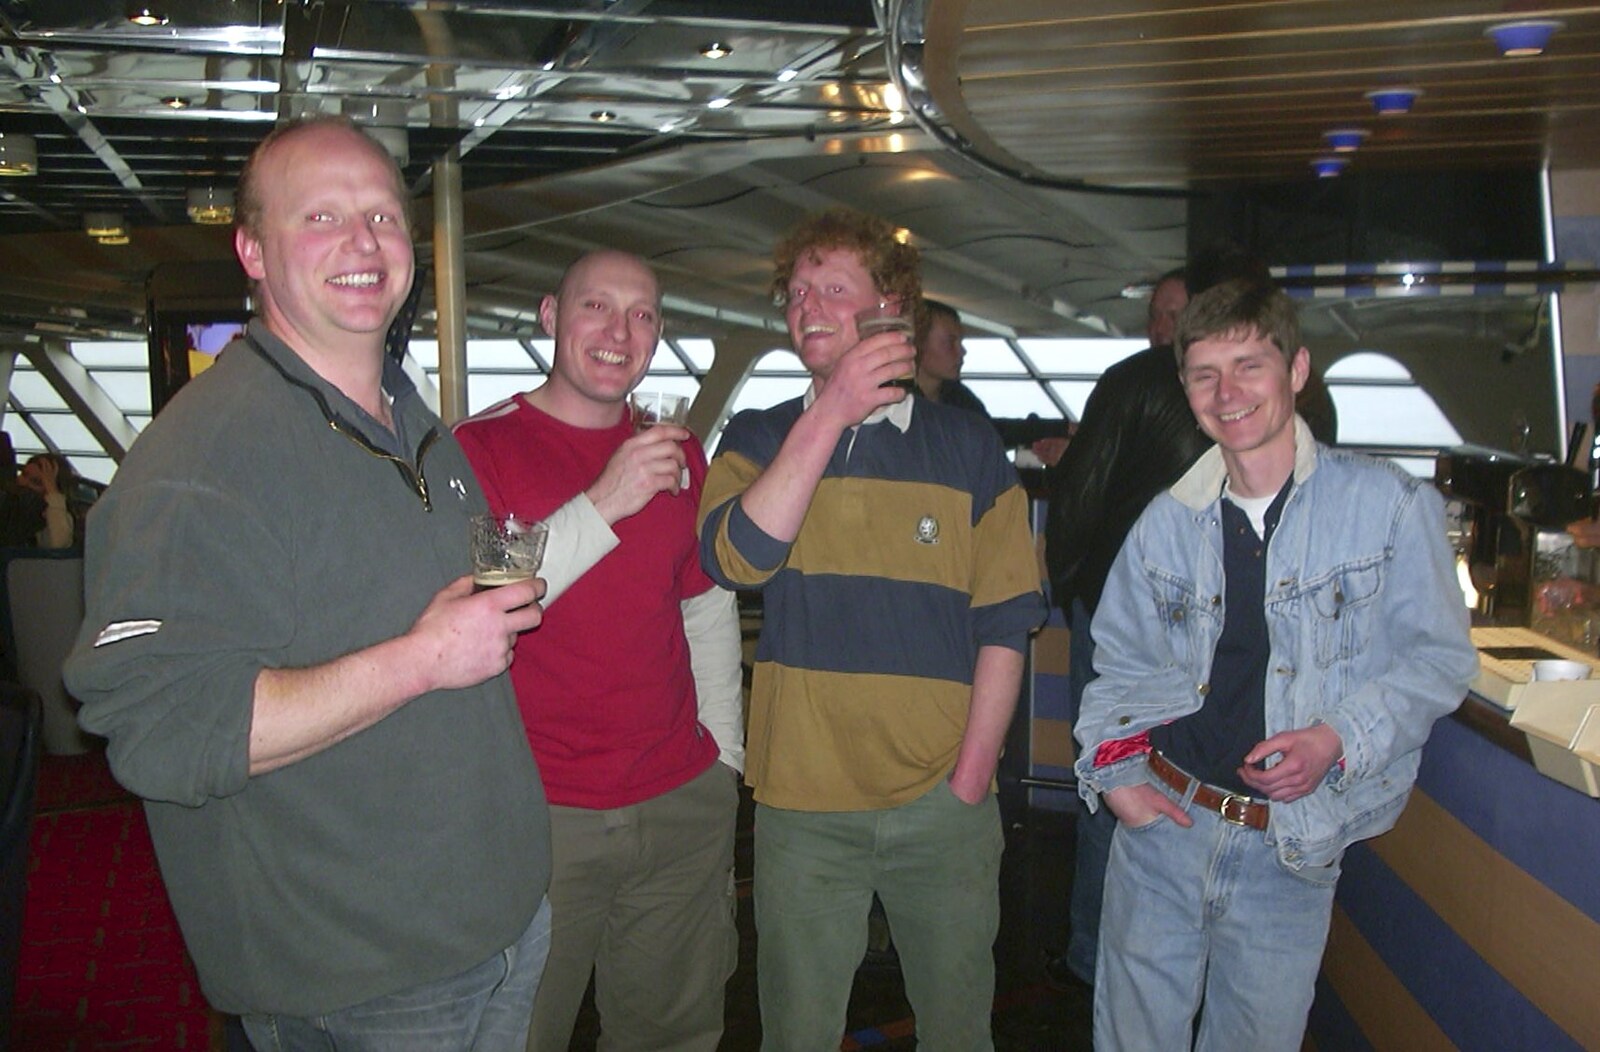 Tim, Gov, Wavy and Ninja M at the bar from Mikey-P's Stag Weekend, Amsterdam, Netherlands - 5th March 2004